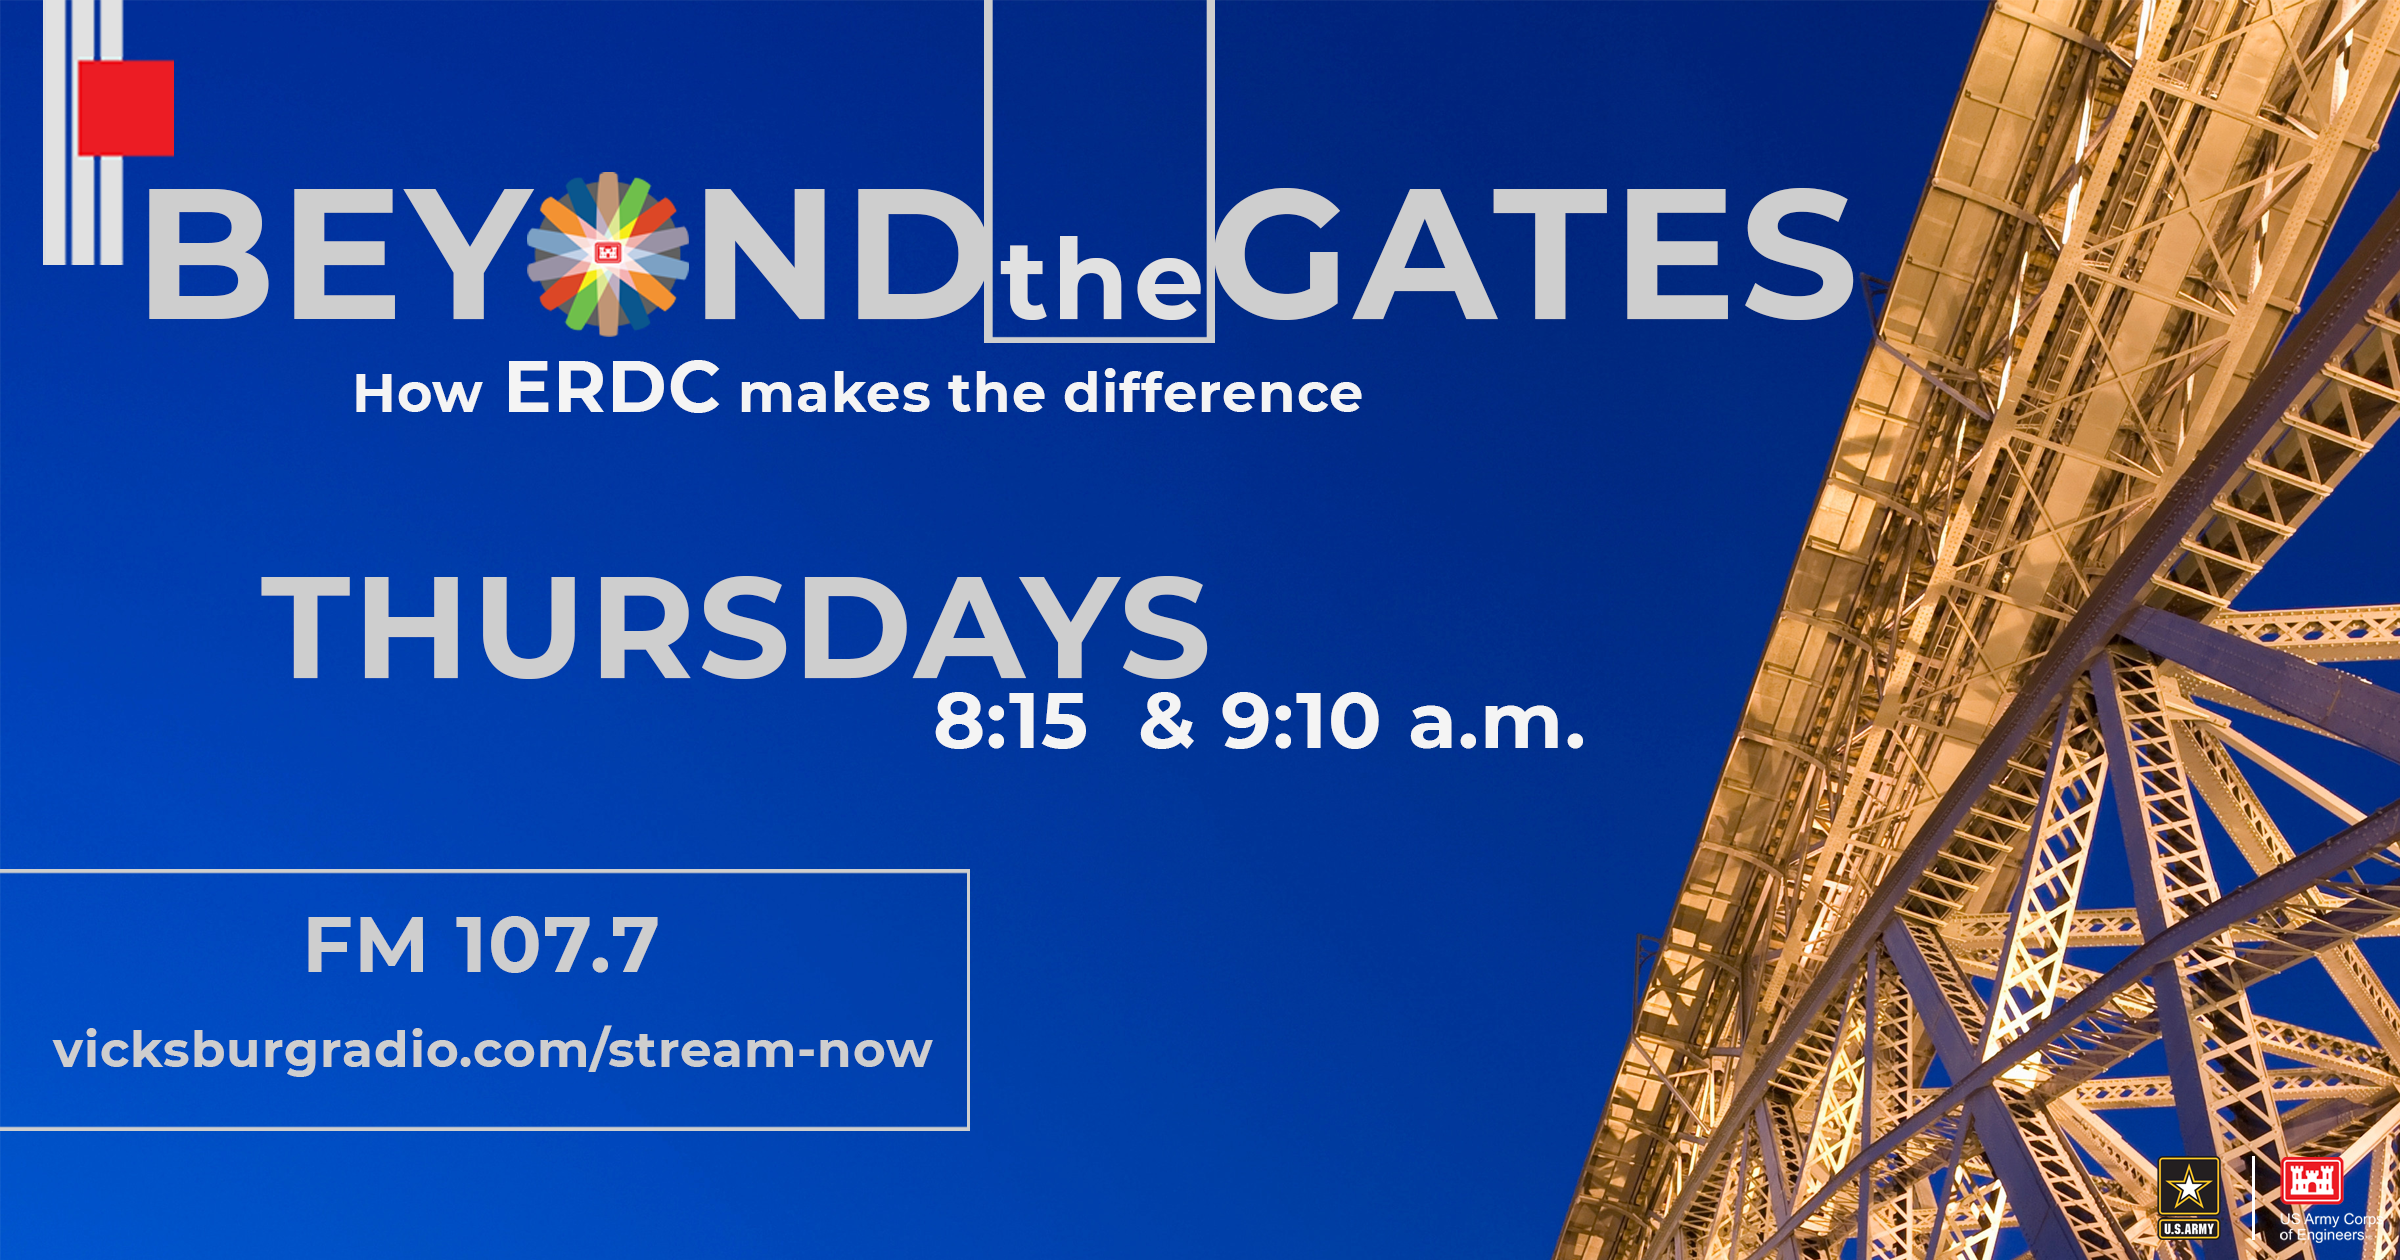 Beyond the Gates: How ERDC Research Affects YOU. Thursdays, FM107.7, 8:15 and 9:15 a.m.